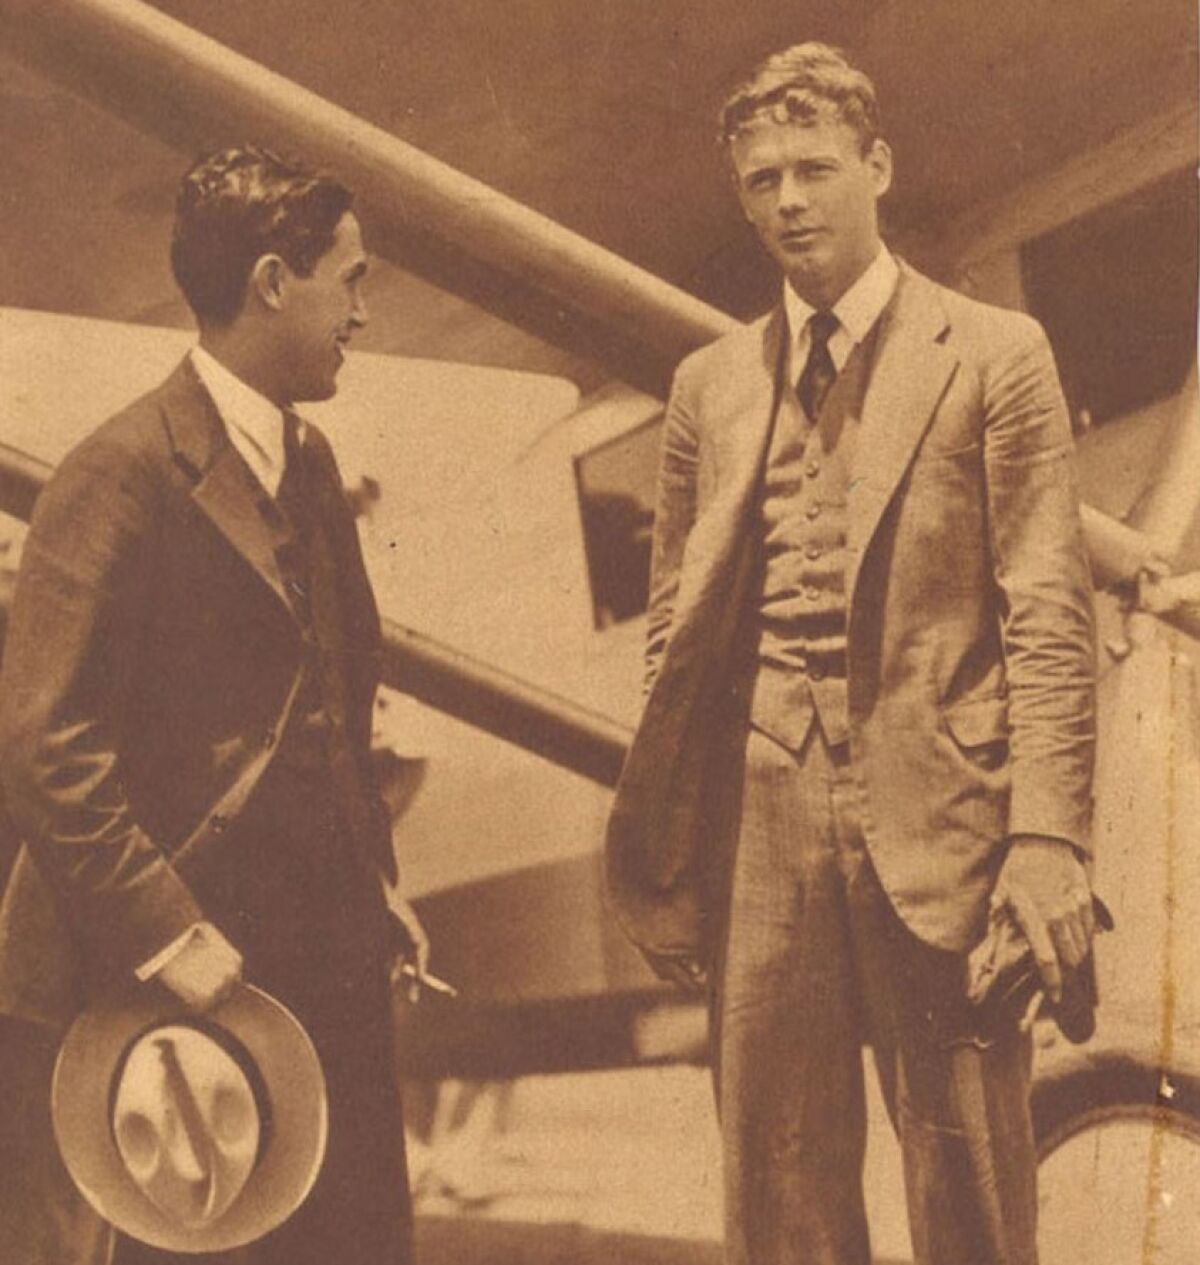 Mexican aviator Emilio Carranza, left, and Charles Lindbergh were friends in 1928. Both held distance solo flight records.